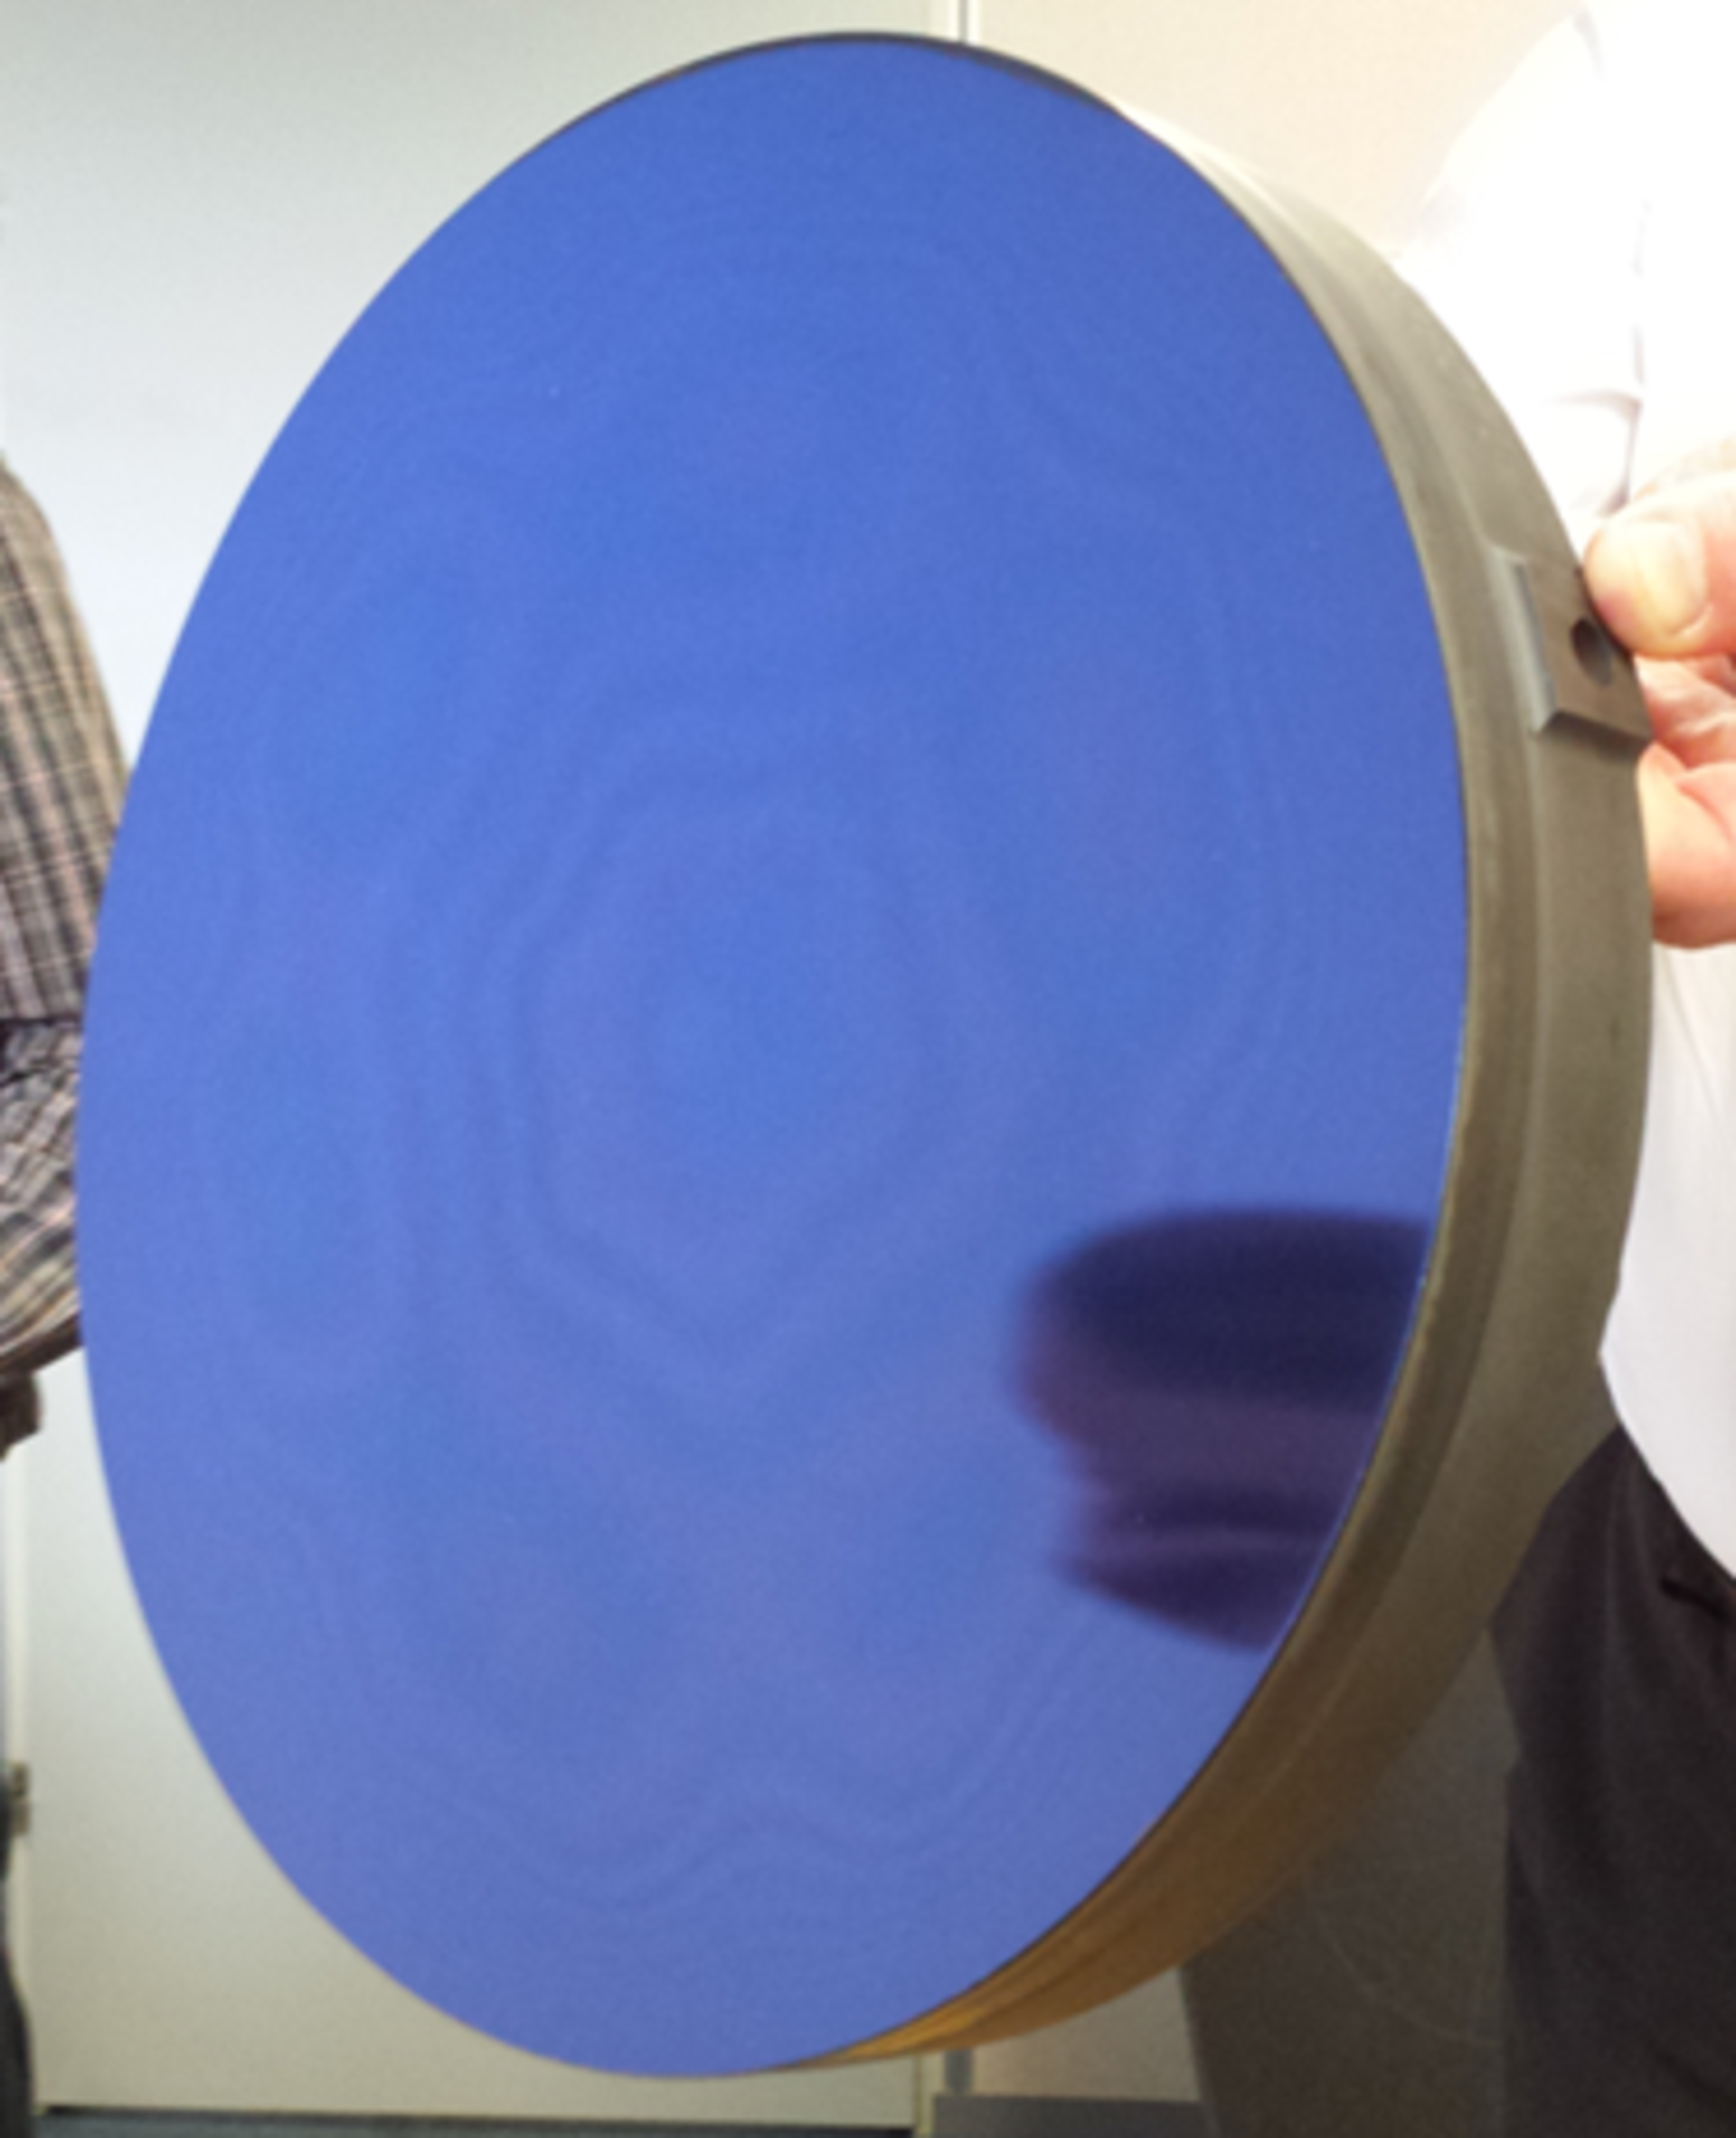 Final mirror coated with polishing layer